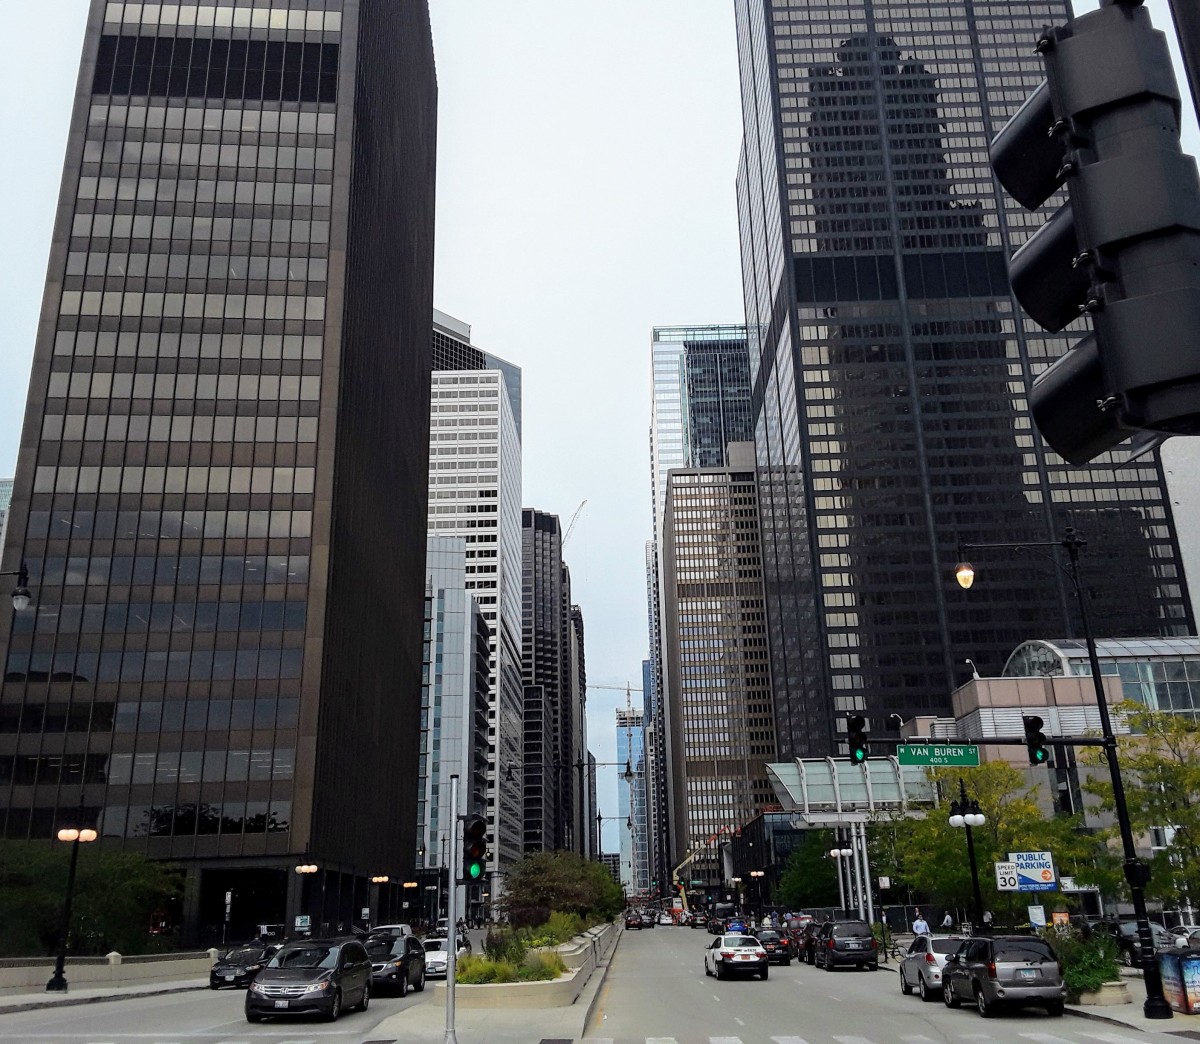 The Chicago Drivers Guide to Rideshare Street Smarts: Quirky Roads/ Wacker Drive